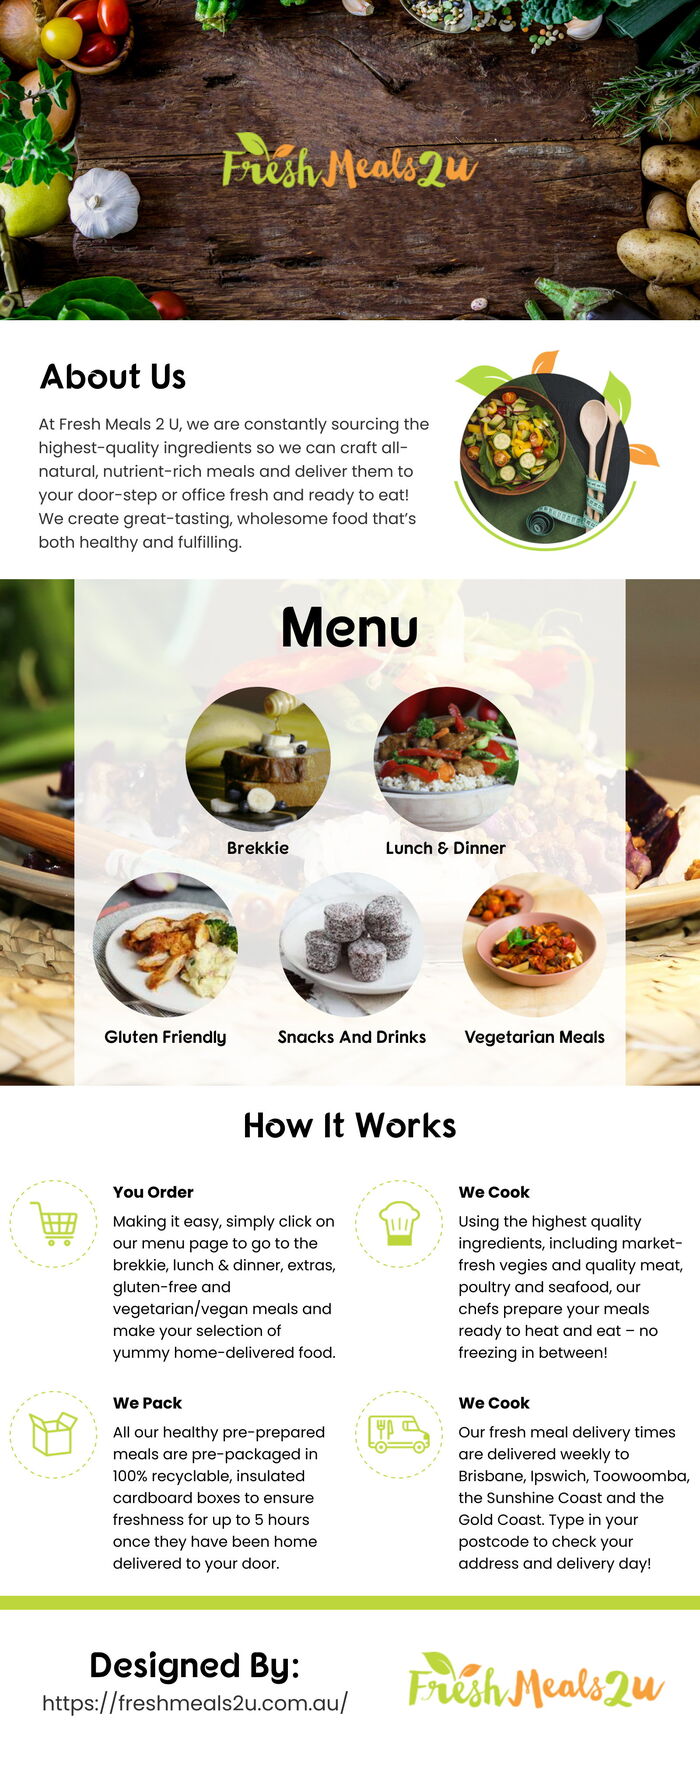 This infographic is designed by Fresh Meals to U